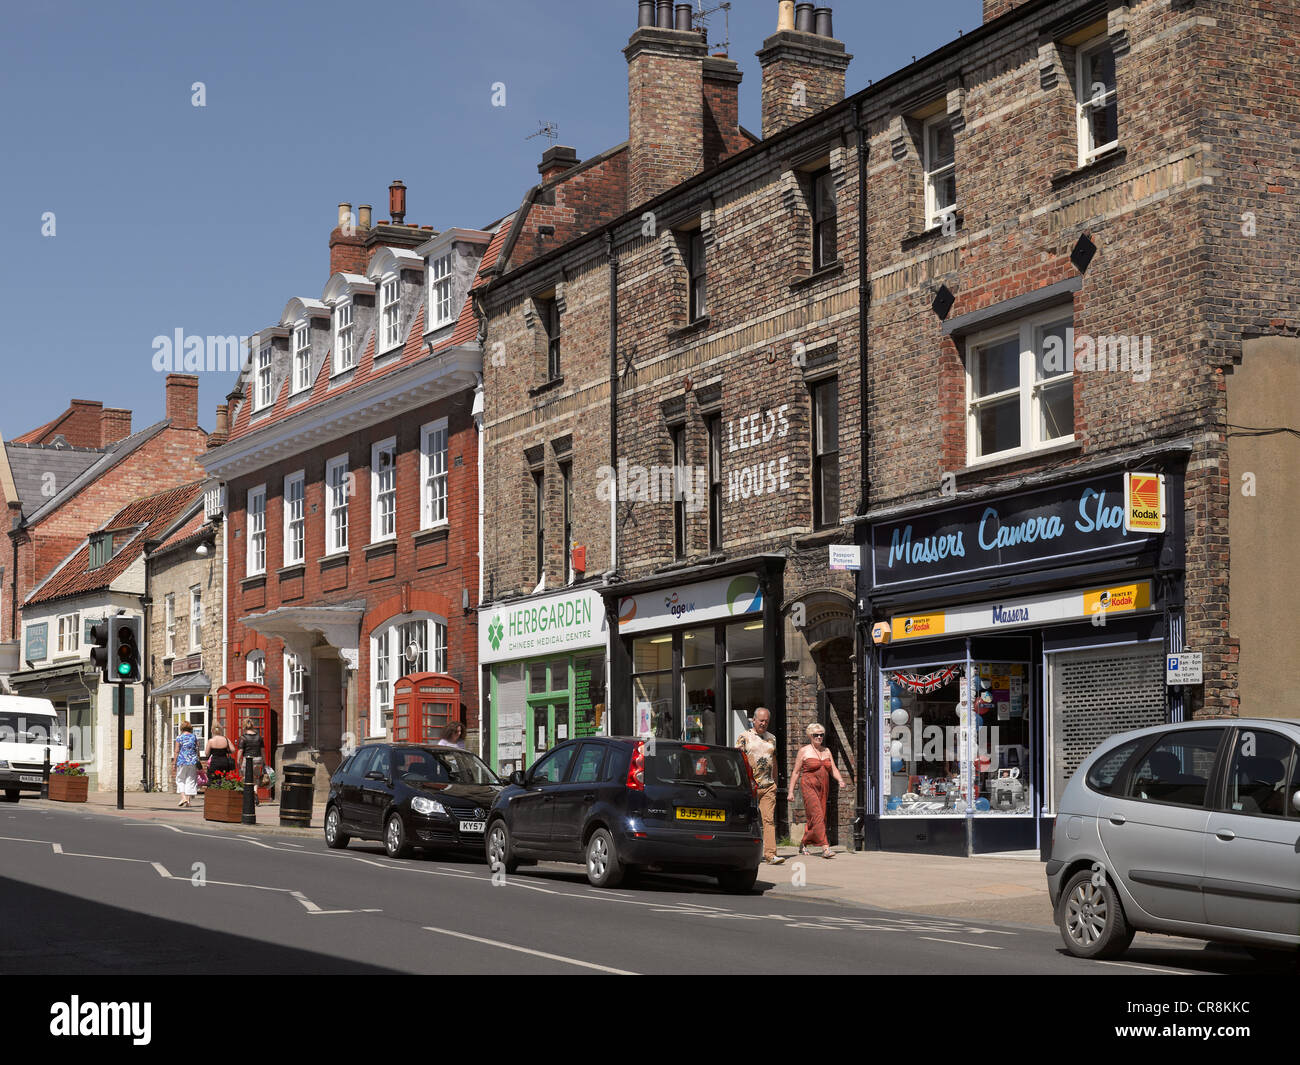 Shops stores business in the town centre Wheelgate Malton North Yorkshire England UK United Kingdom GB Great Britain Stock Photo